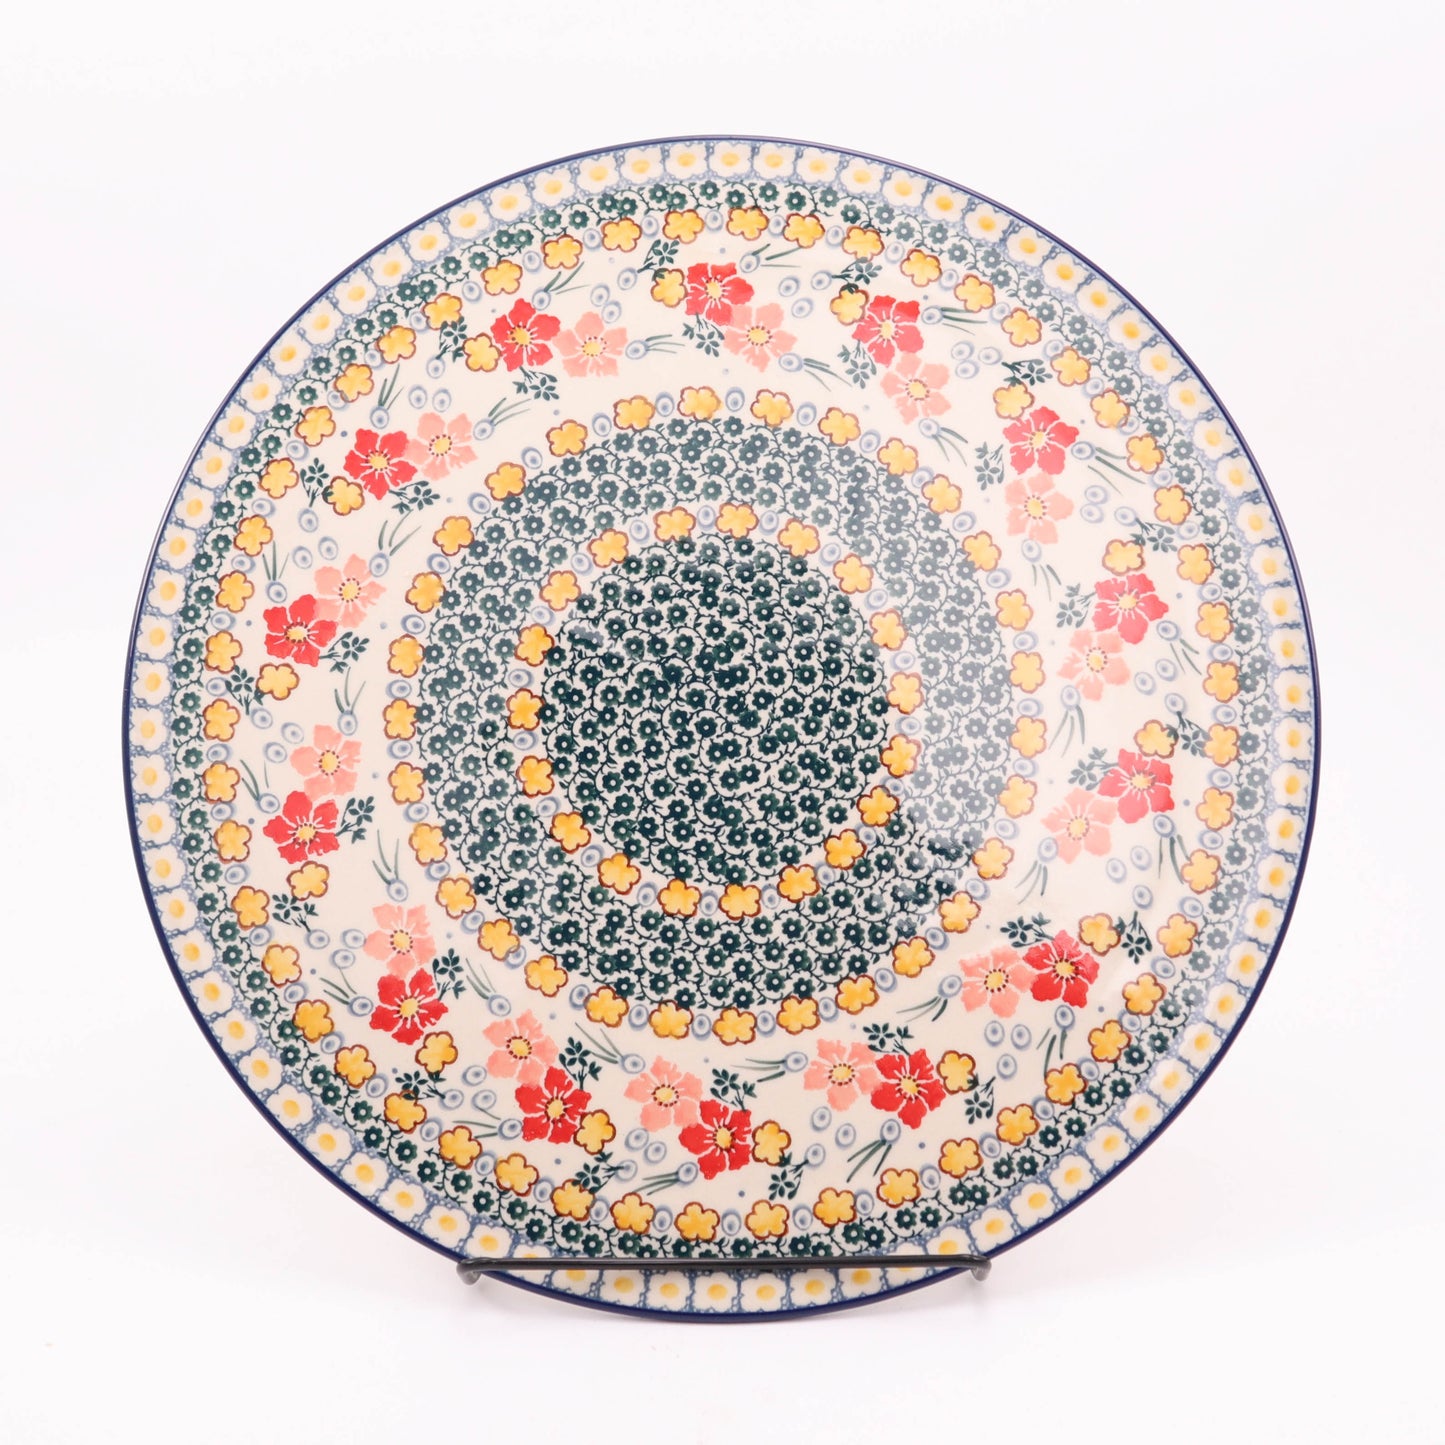 13" Pizza Plate. Pattern: Carefree